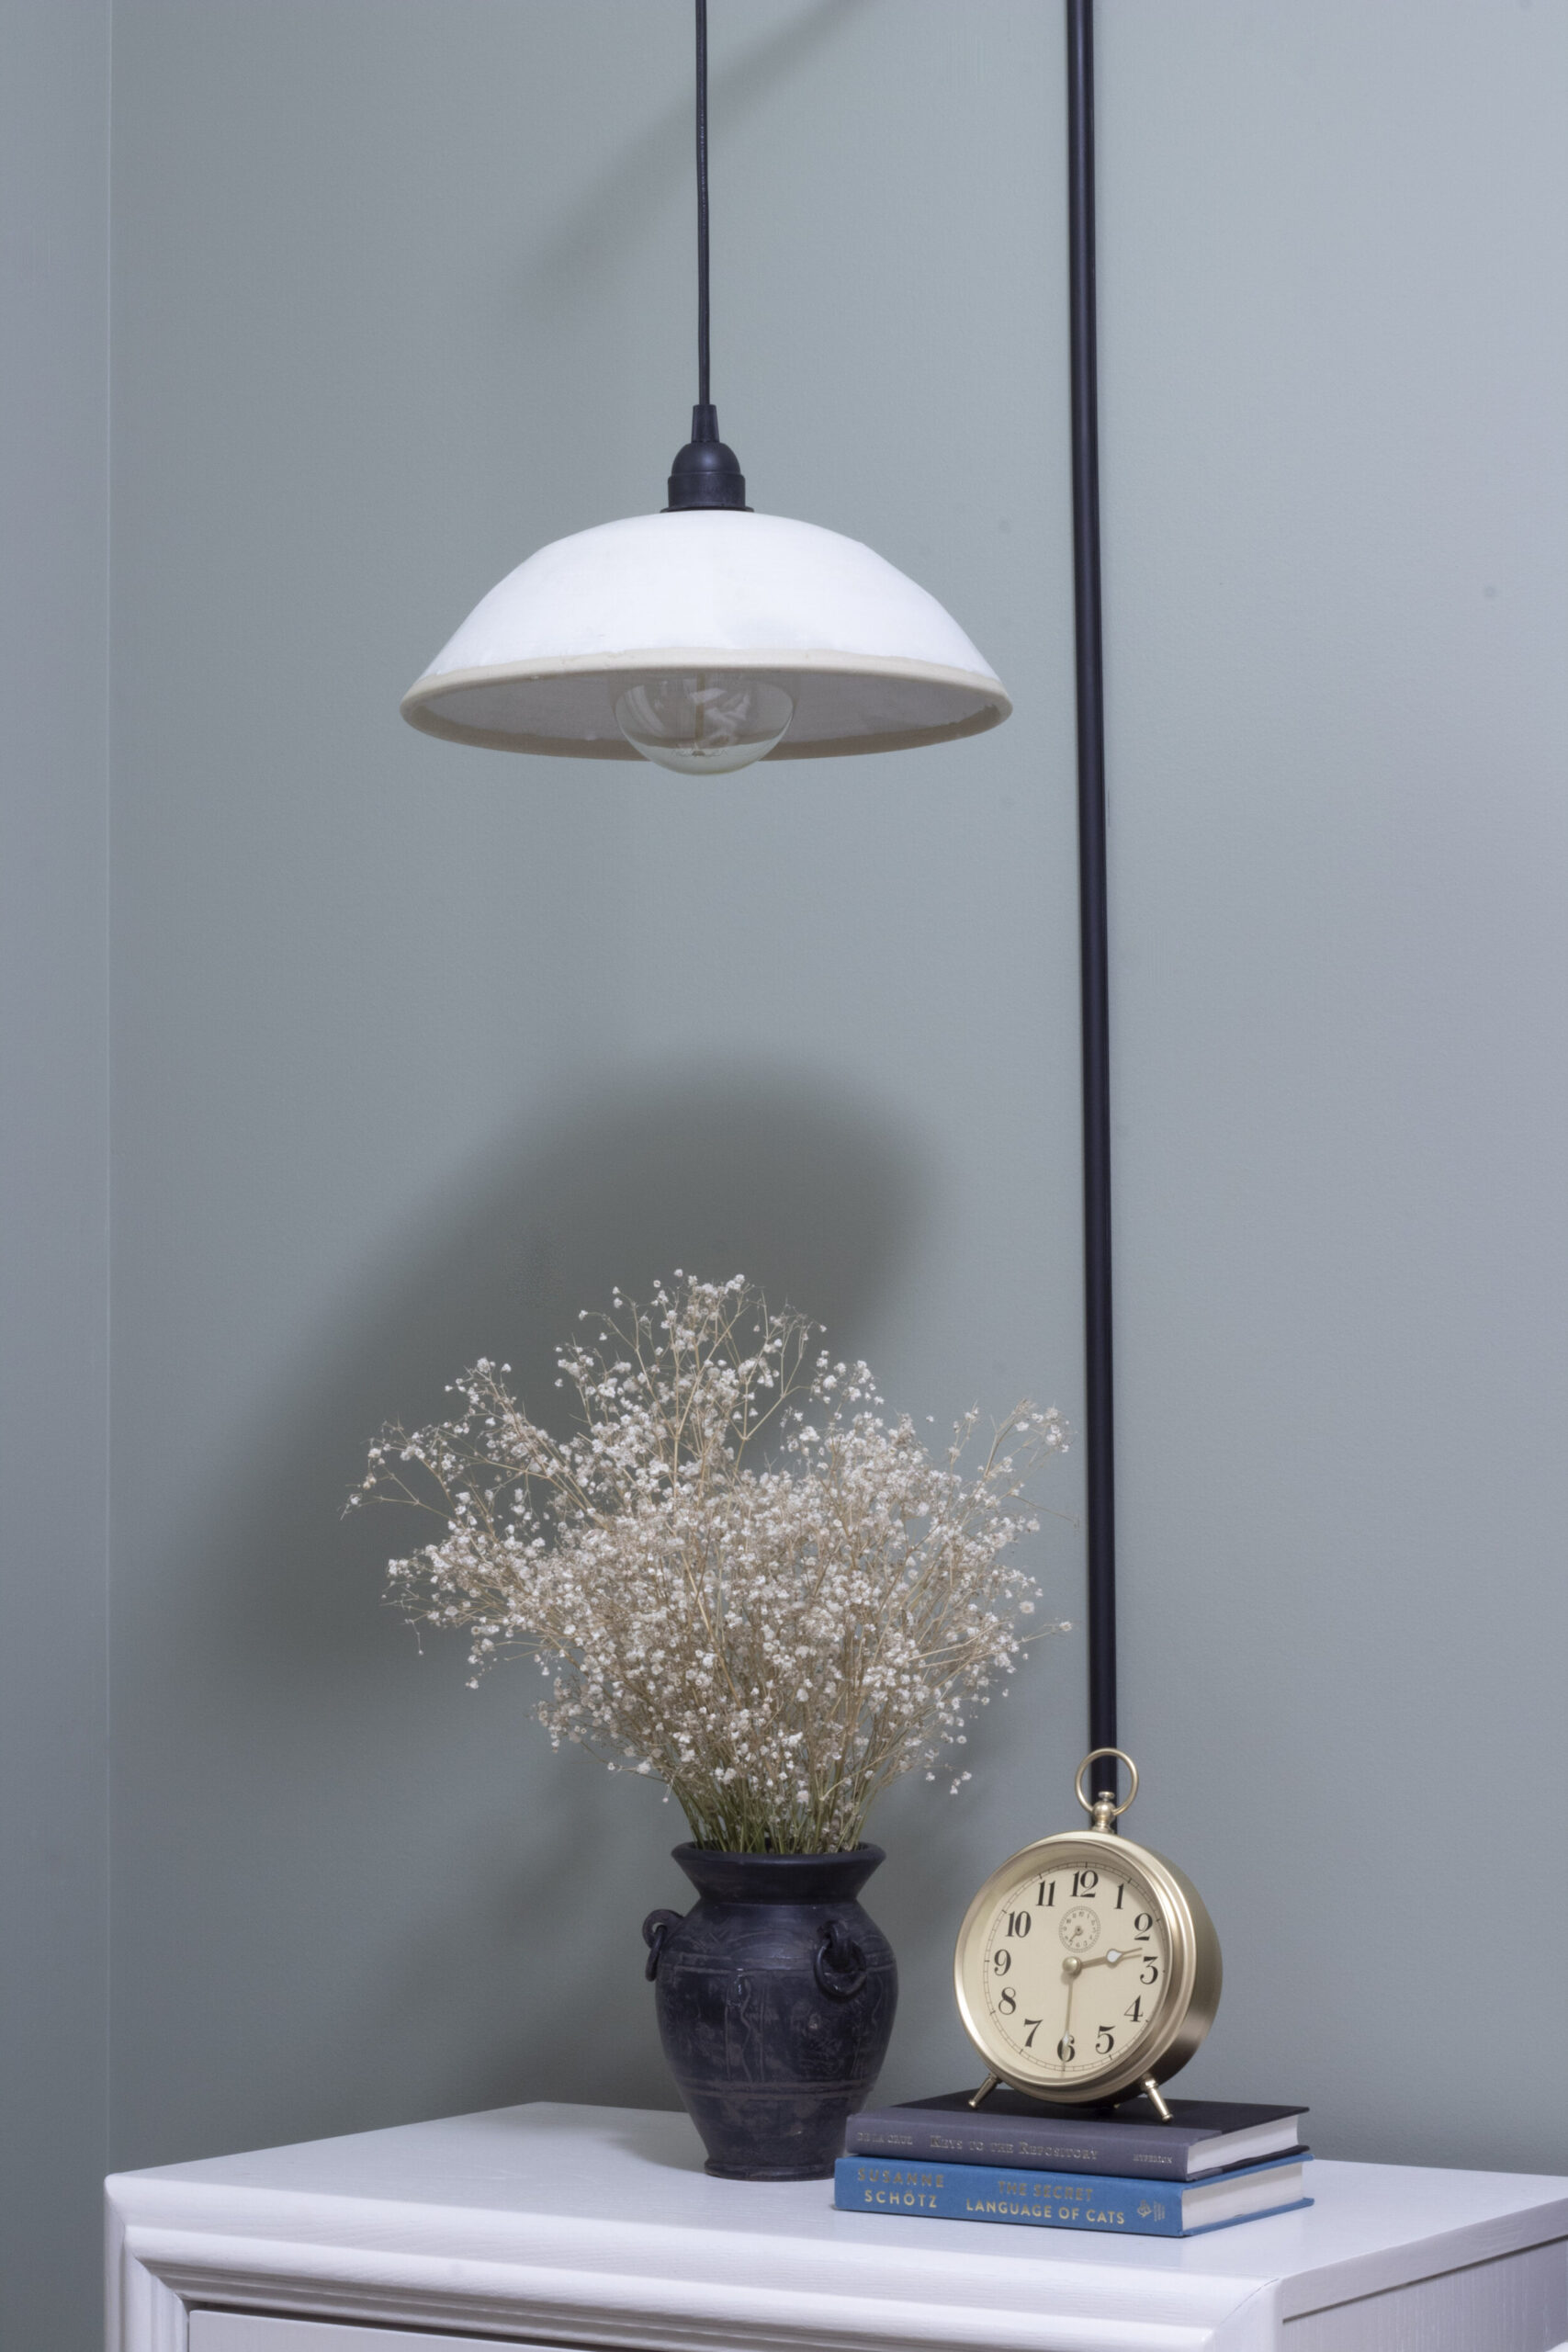 ceramic pendant hanging from a wall bracket in a green room